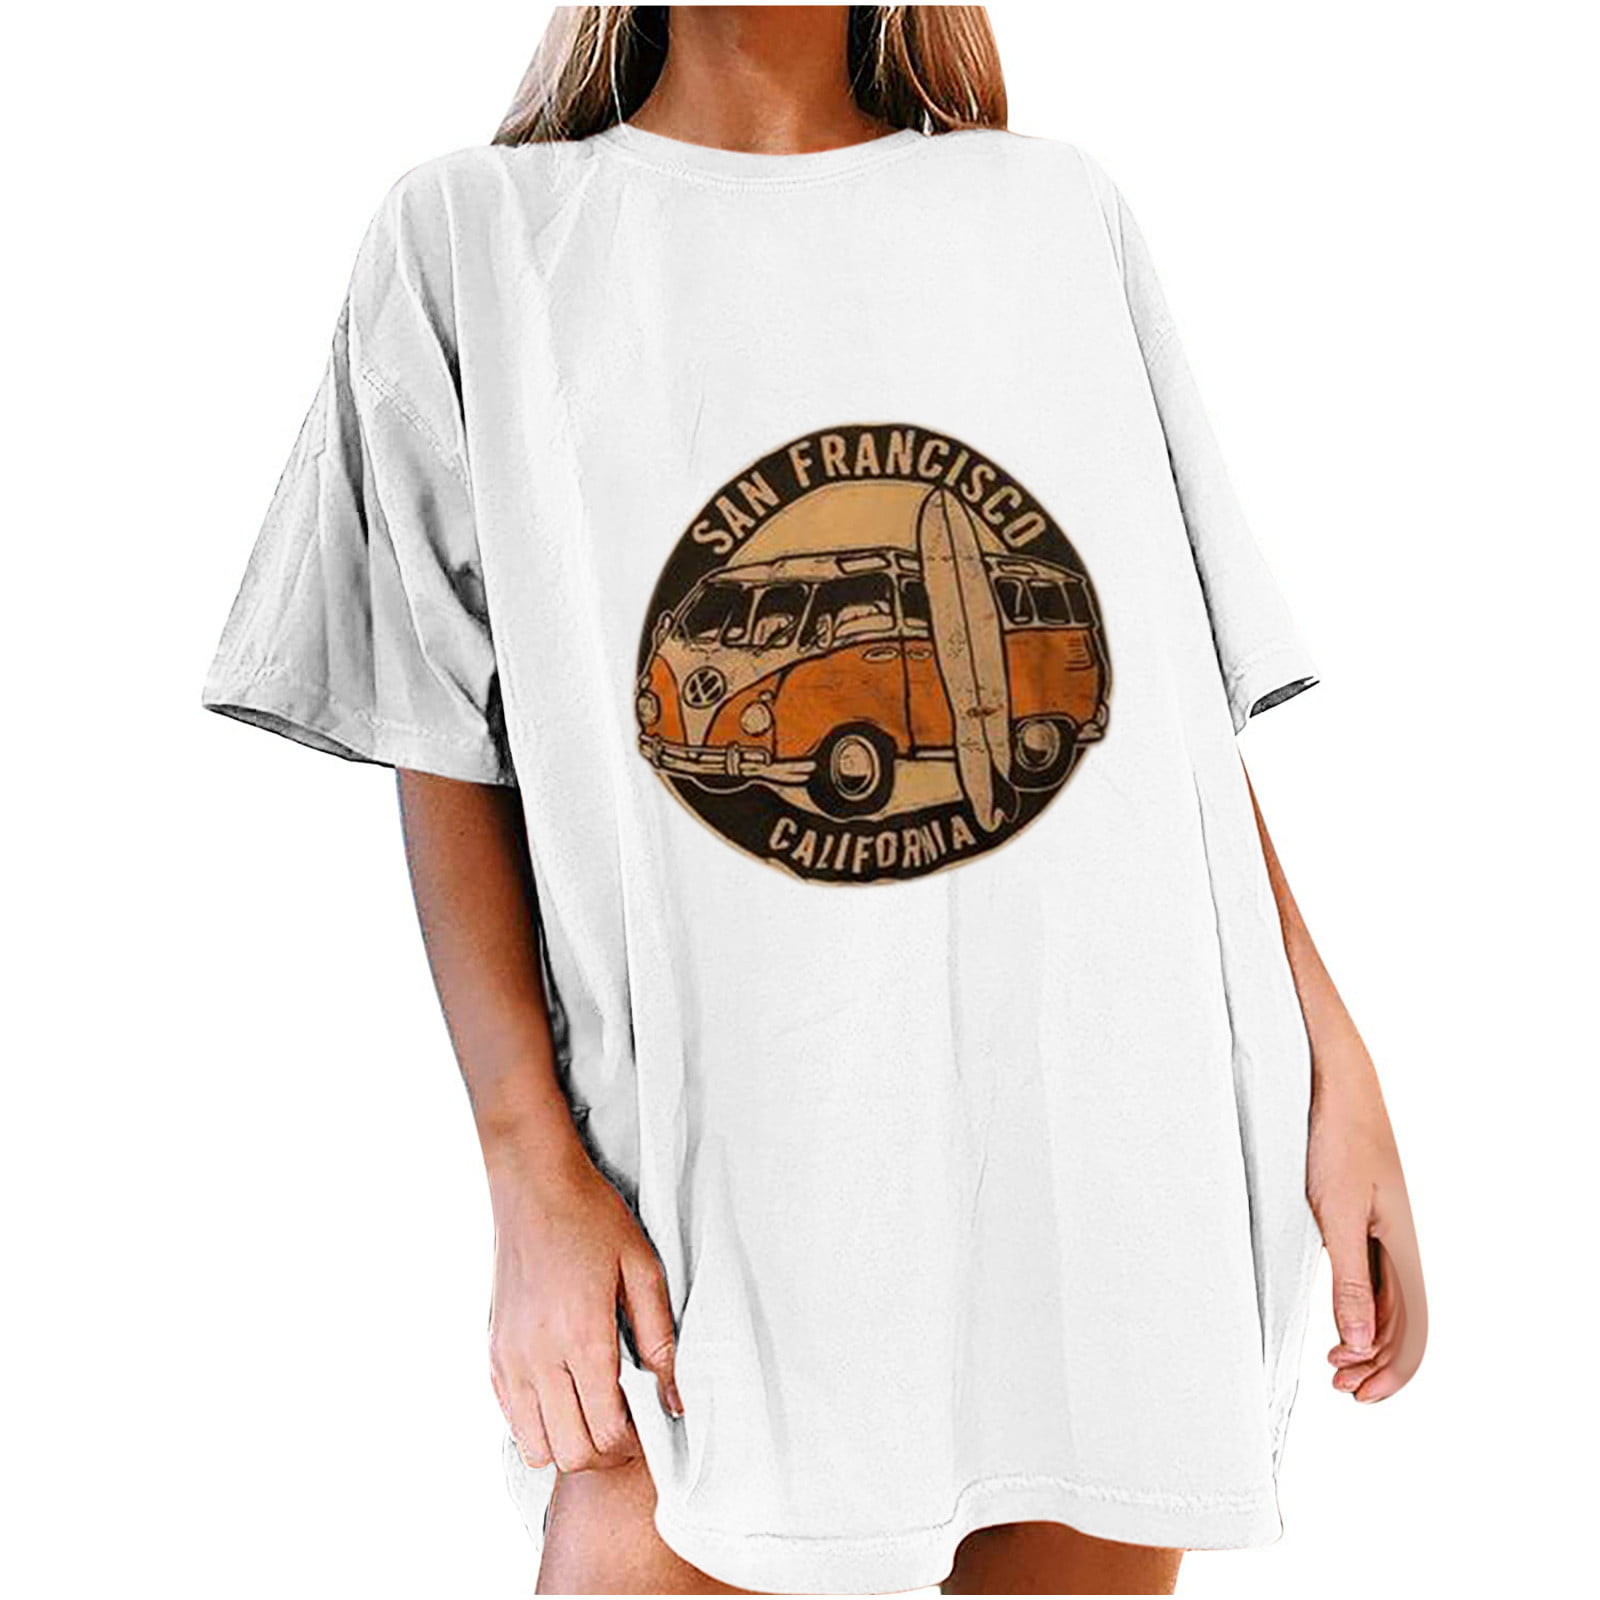 Womens Vintage Car Graphic Tops Oversized Shirts Short Sleeve Crewneck Tees Loose Soft Blouses 